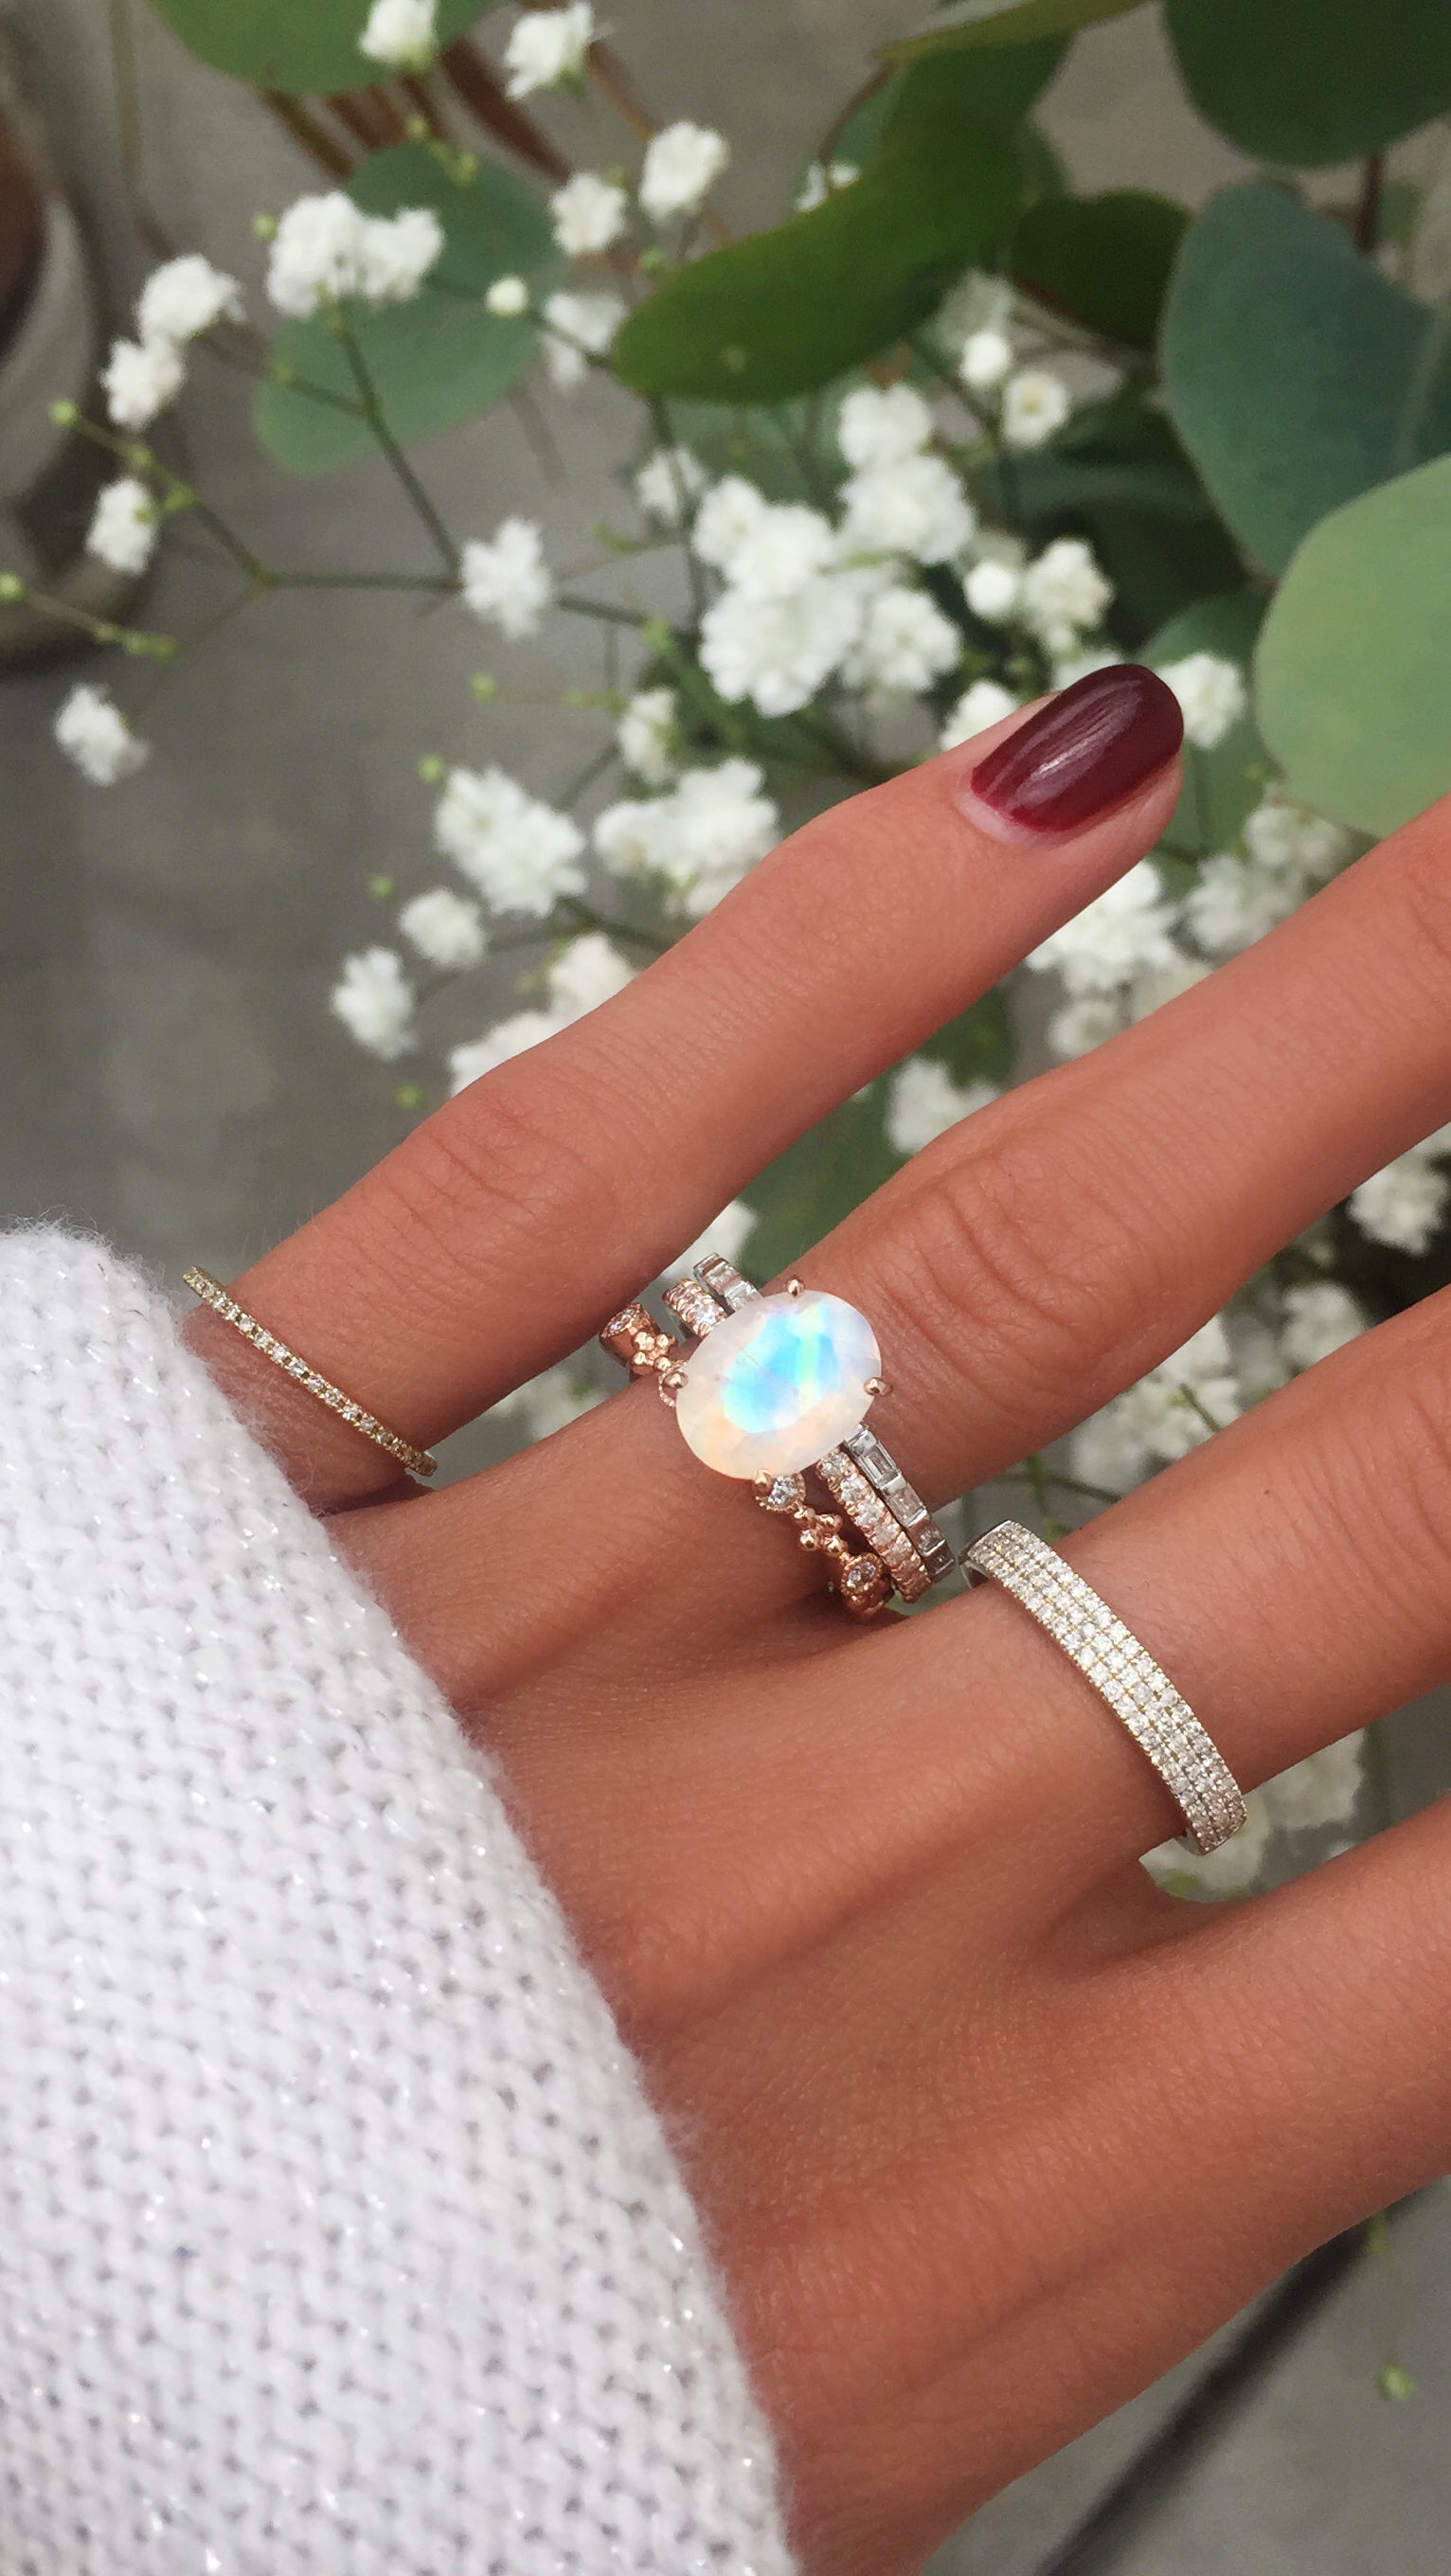 14kt gold and diamond solitaire moonstone eternity ring - Luna Skye